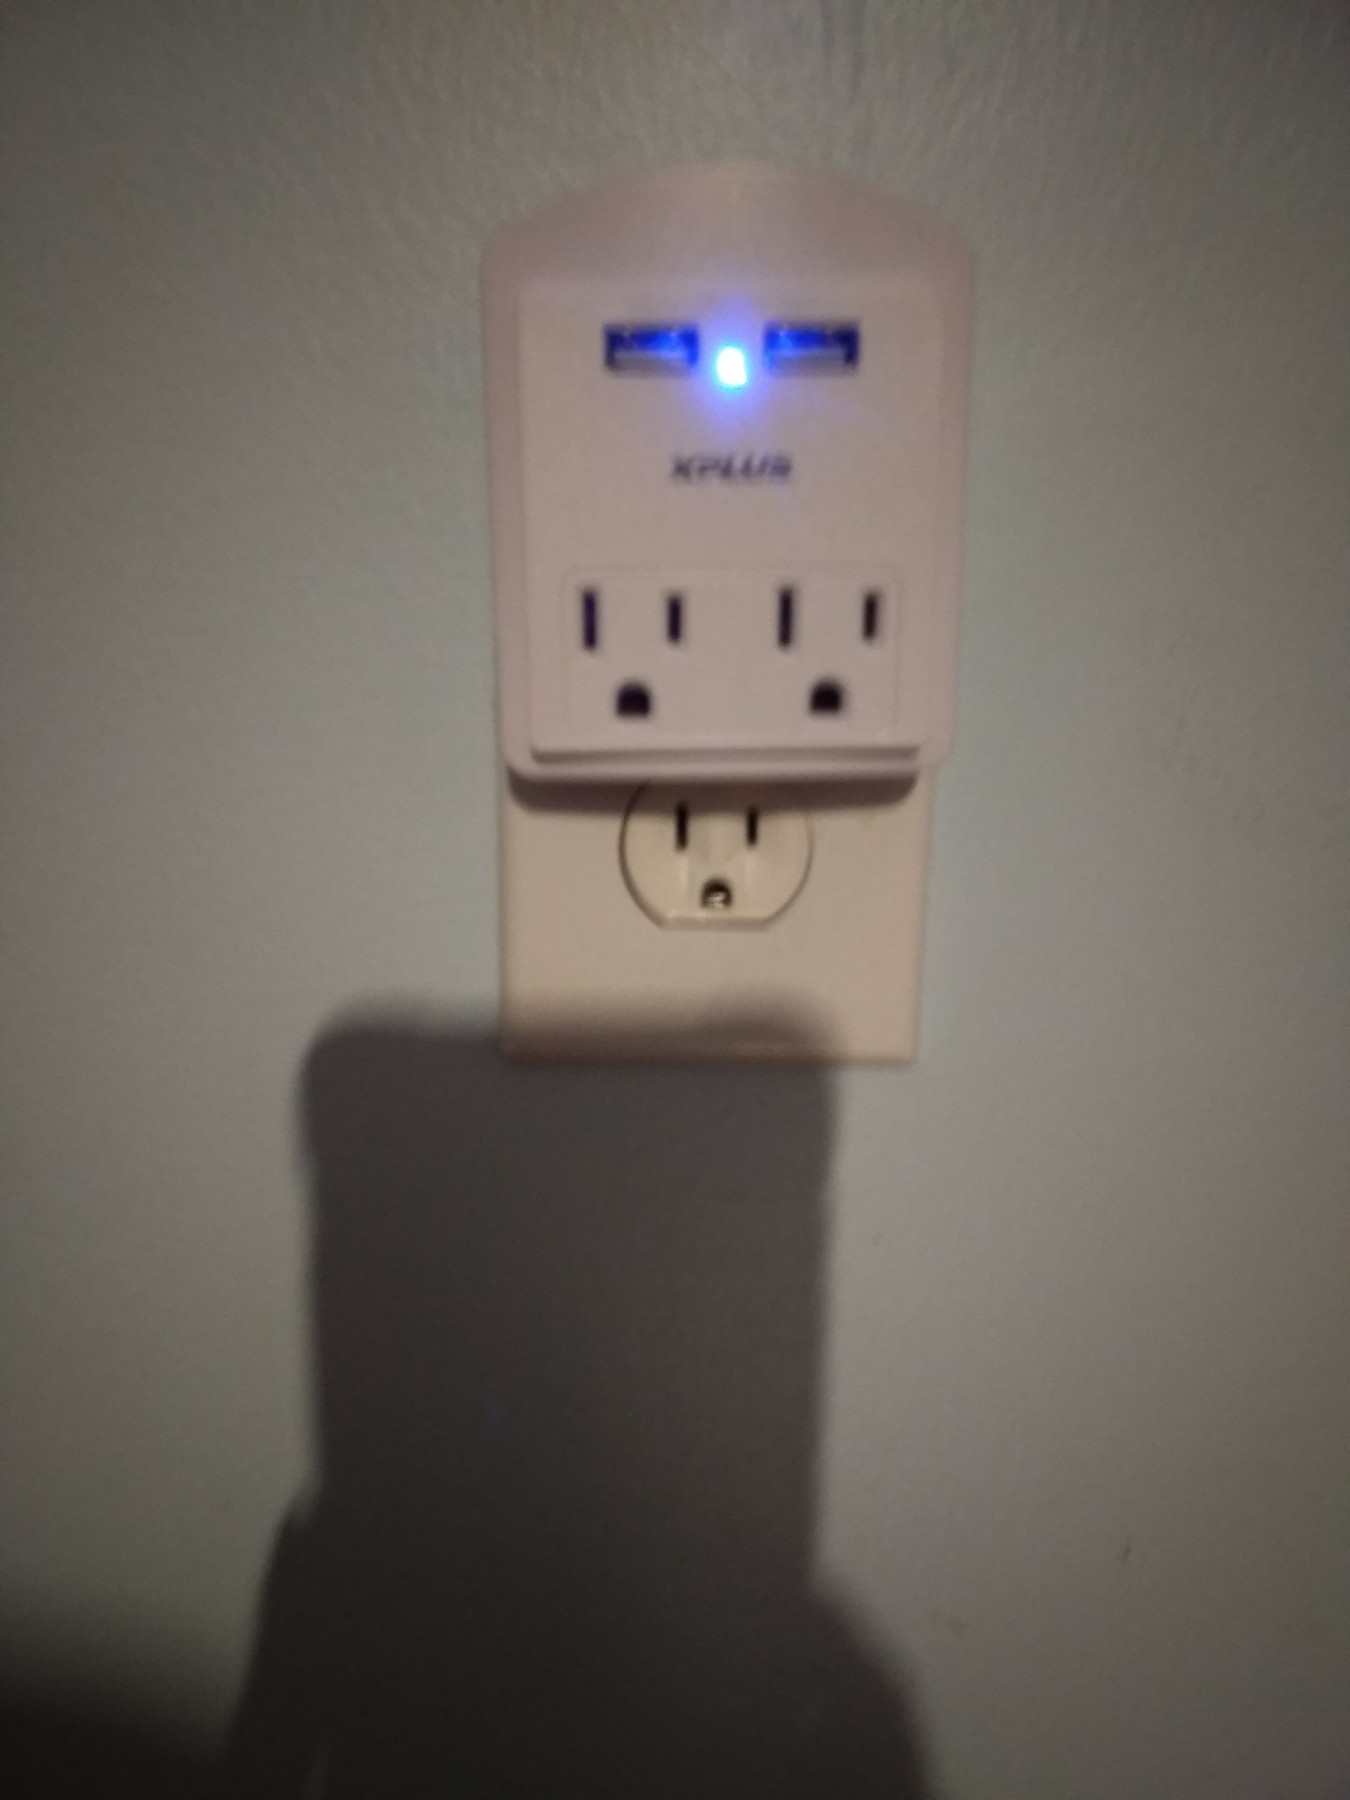 The XPLUS USB Wall Outlet has 2 USB charging ports and 2 AC Outlet Plugs